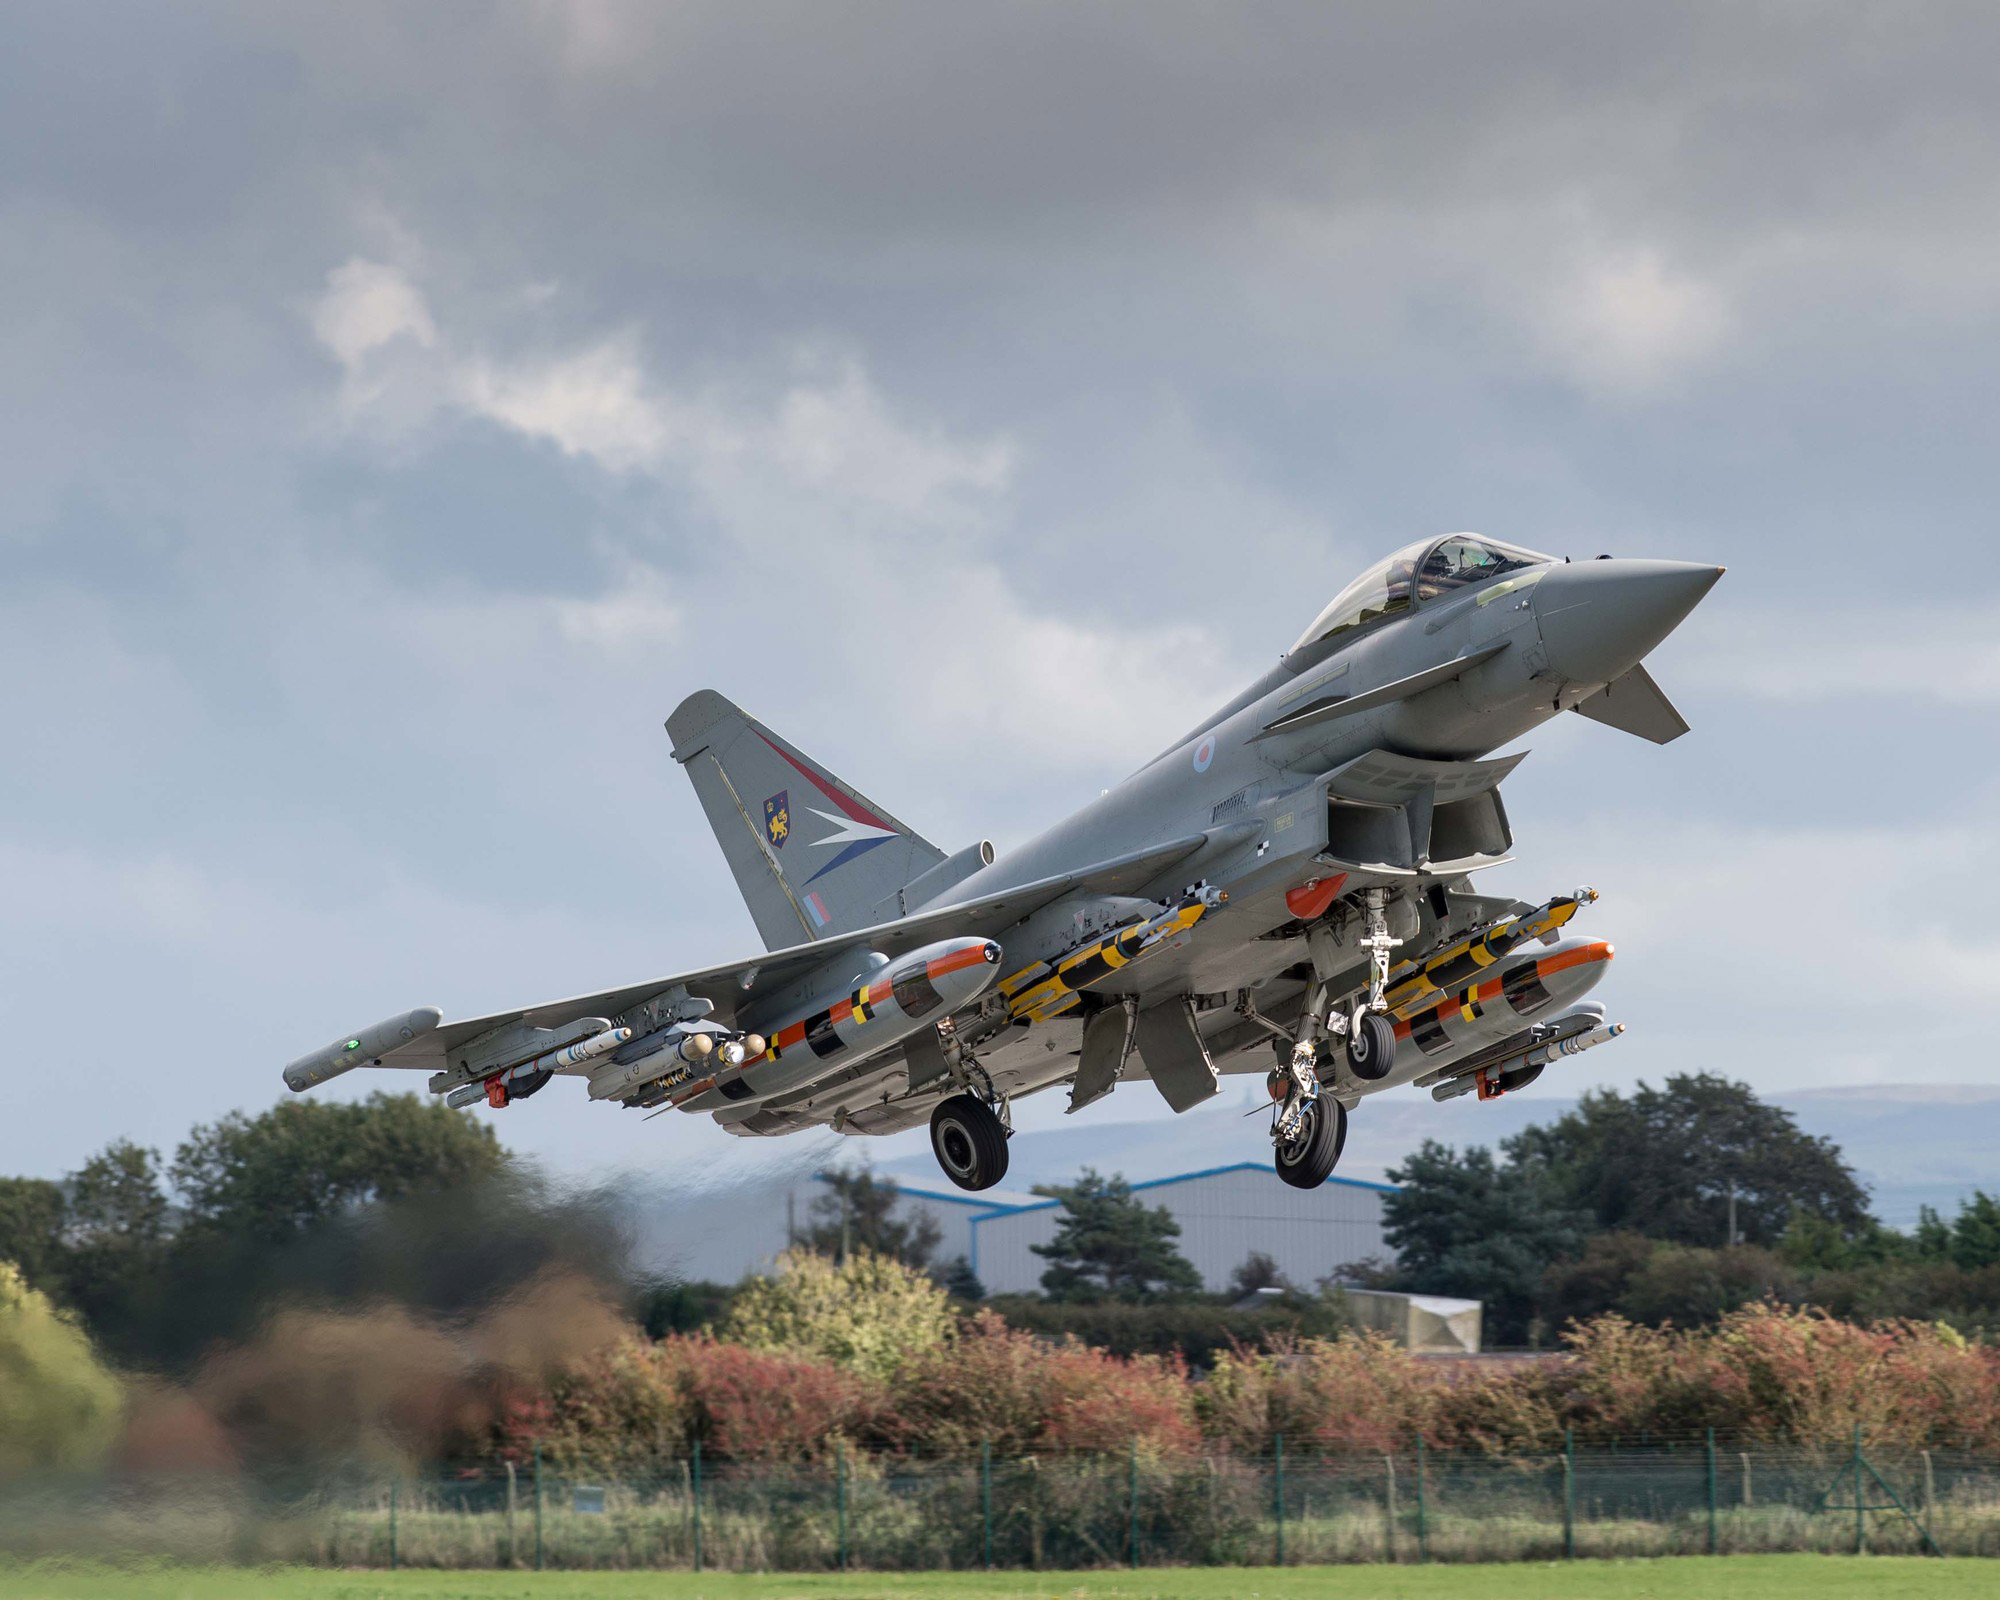 Eurofighter Typhoon carrying Brimstone 2 missiles